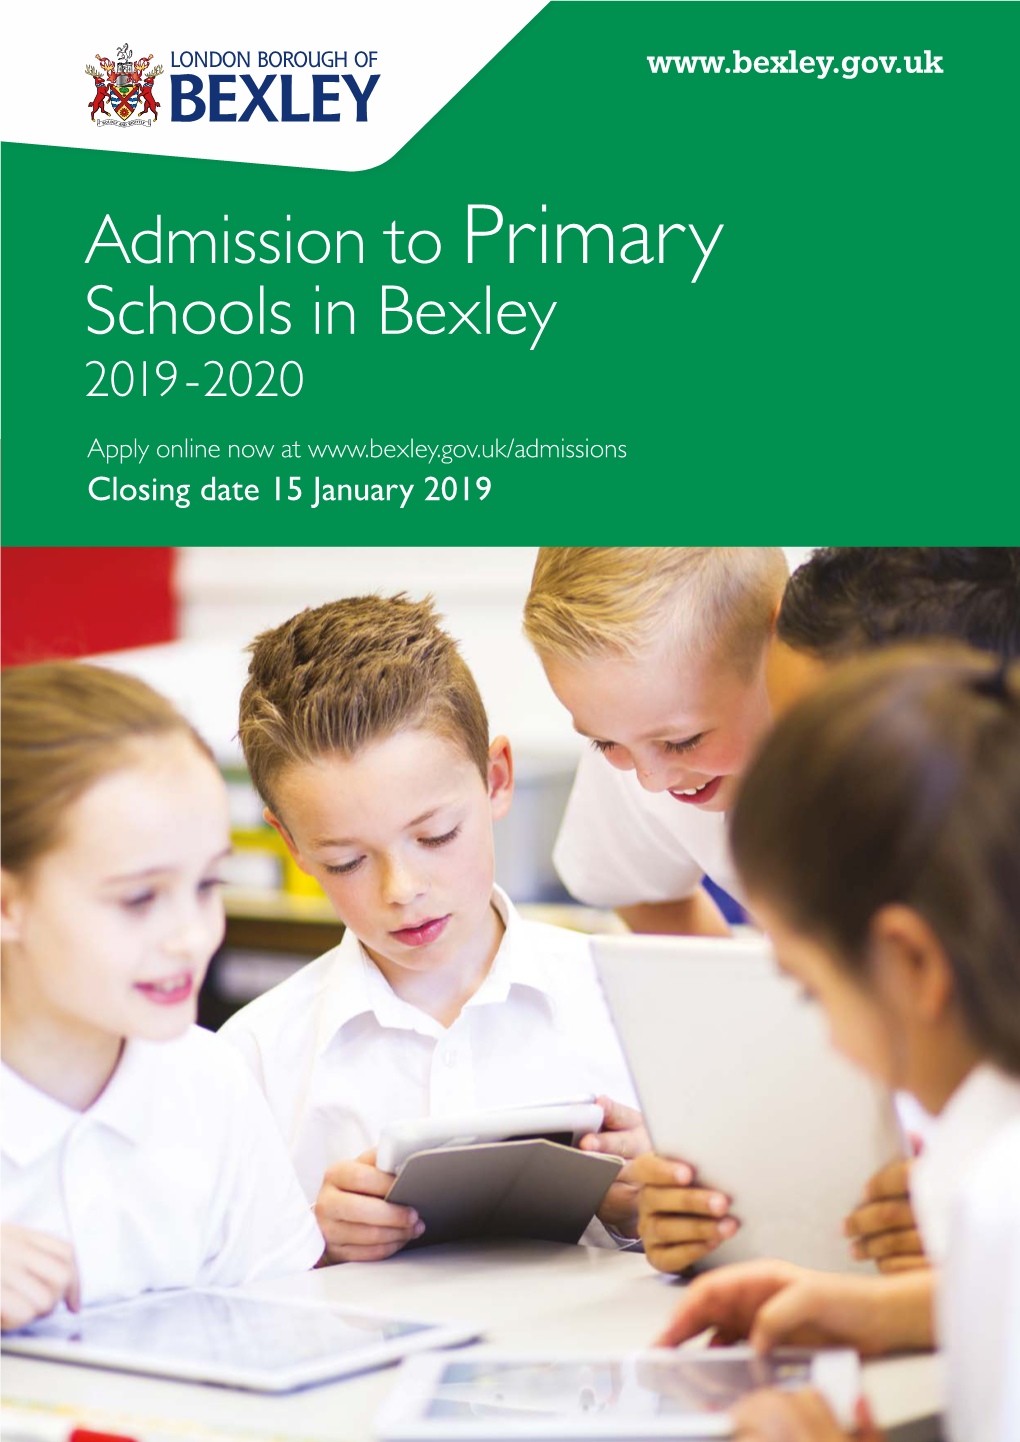 Admission to Primary Schools 2019 to 2020